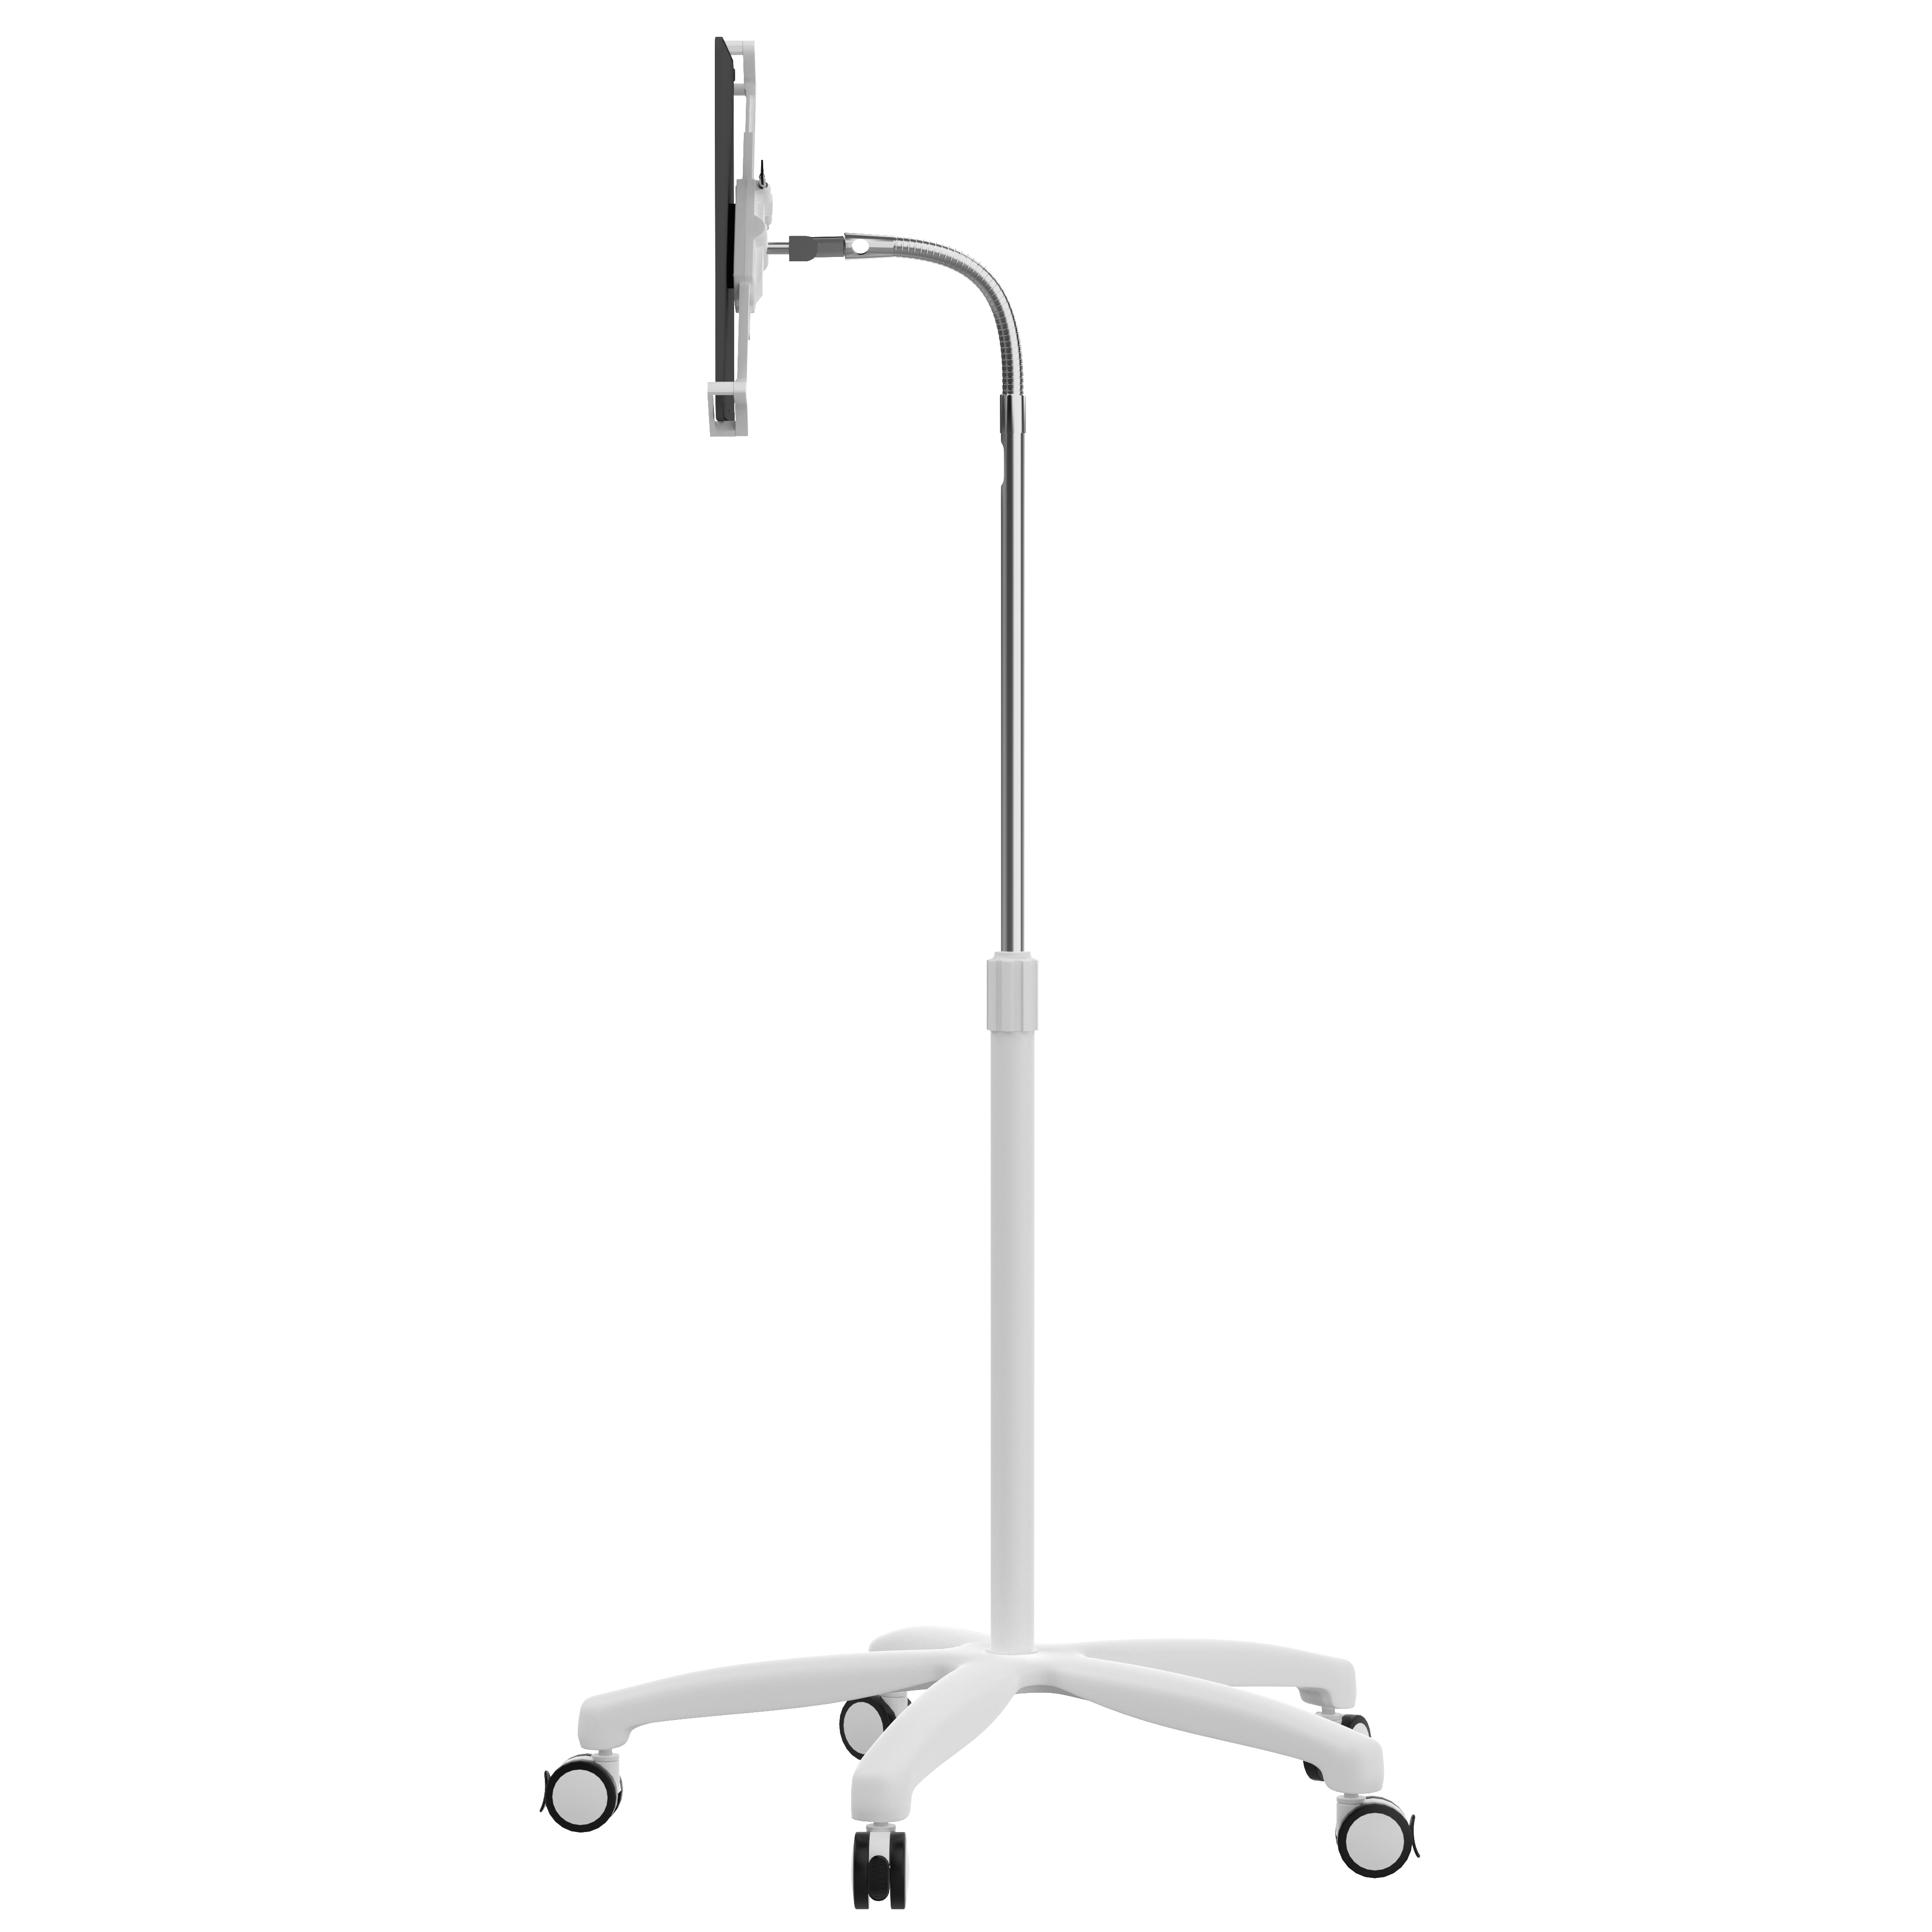 Heavy-Duty Medical Mobile Floor Stand for 7 - 13 Inch Tablets (White)